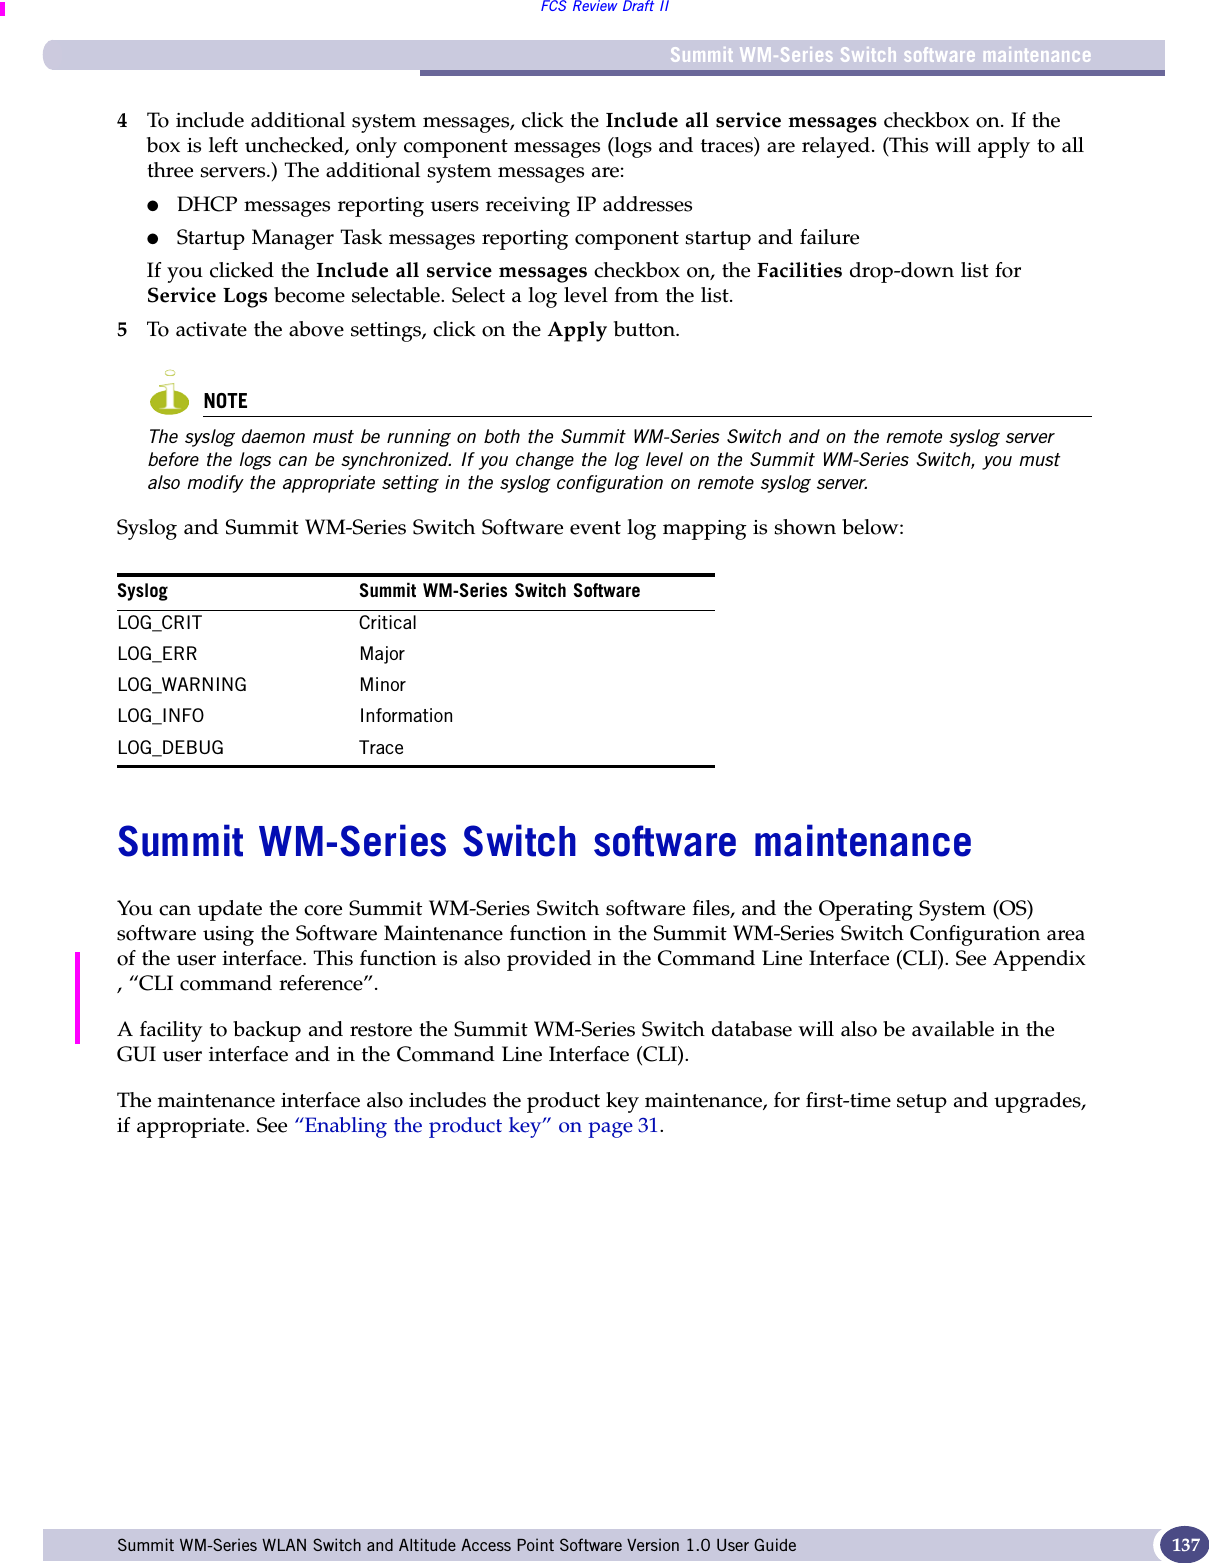 Summit WM-Series Switch software maintenanceFCS Review Draft IISummit WM-Series WLAN Switch and Altitude Access Point Software Version 1.0 User Guide 1374To include additional system messages, click the Include all service messages checkbox on. If the box is left unchecked, only component messages (logs and traces) are relayed. (This will apply to all three servers.) The additional system messages are:●DHCP messages reporting users receiving IP addresses●Startup Manager Task messages reporting component startup and failureIf you clicked the Include all service messages checkbox on, the Facilities drop-down list for Service Logs become selectable. Select a log level from the list.5To activate the above settings, click on the Apply button.NOTEThe syslog daemon must be running on both the Summit WM-Series Switch and on the remote syslog server before the logs can be synchronized. If you change the log level on the Summit WM-Series Switch, you must also modify the appropriate setting in the syslog configuration on remote syslog server.Syslog and Summit WM-Series Switch Software event log mapping is shown below:Summit WM-Series Switch software maintenanceYou can update the core Summit WM-Series Switch software files, and the Operating System (OS) software using the Software Maintenance function in the Summit WM-Series Switch Configuration area of the user interface. This function is also provided in the Command Line Interface (CLI). See Appendix , “CLI command reference”.A facility to backup and restore the Summit WM-Series Switch database will also be available in the GUI user interface and in the Command Line Interface (CLI).The maintenance interface also includes the product key maintenance, for first-time setup and upgrades, if appropriate. See “Enabling the product key” on page 31.Syslog Summit WM-Series Switch SoftwareLOG_CRIT CriticalLOG_ERR MajorLOG_WARNING MinorLOG_INFO InformationLOG_DEBUG Trace